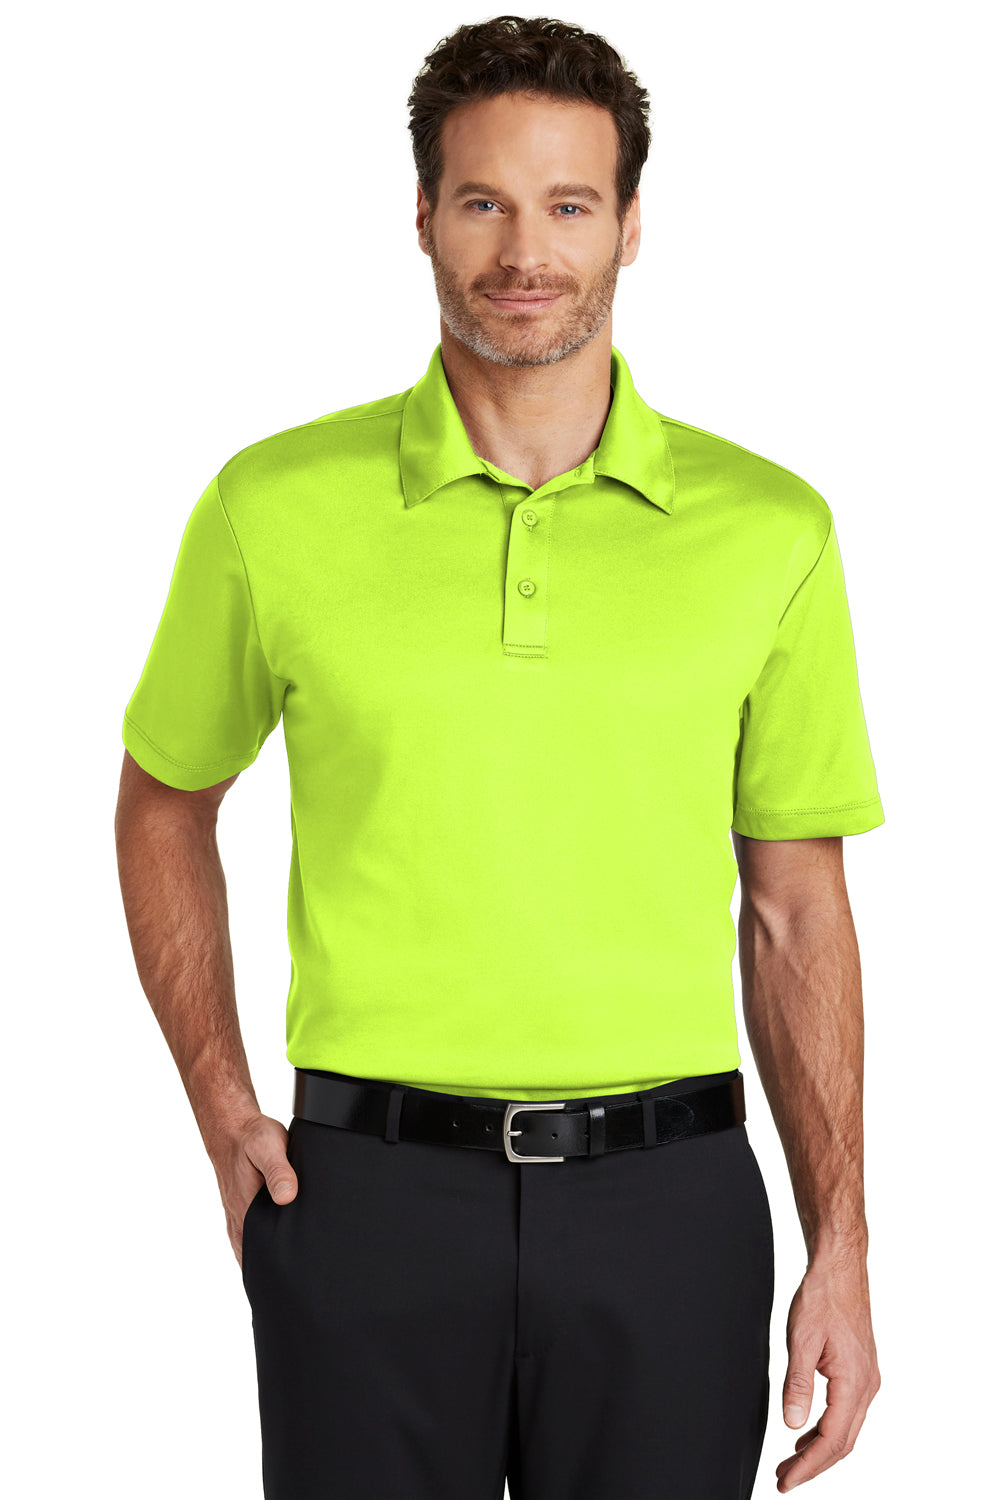 Port Authority K540 Mens Silk Touch Performance Moisture Wicking Short Sleeve Polo Shirt Neon Yellow Front